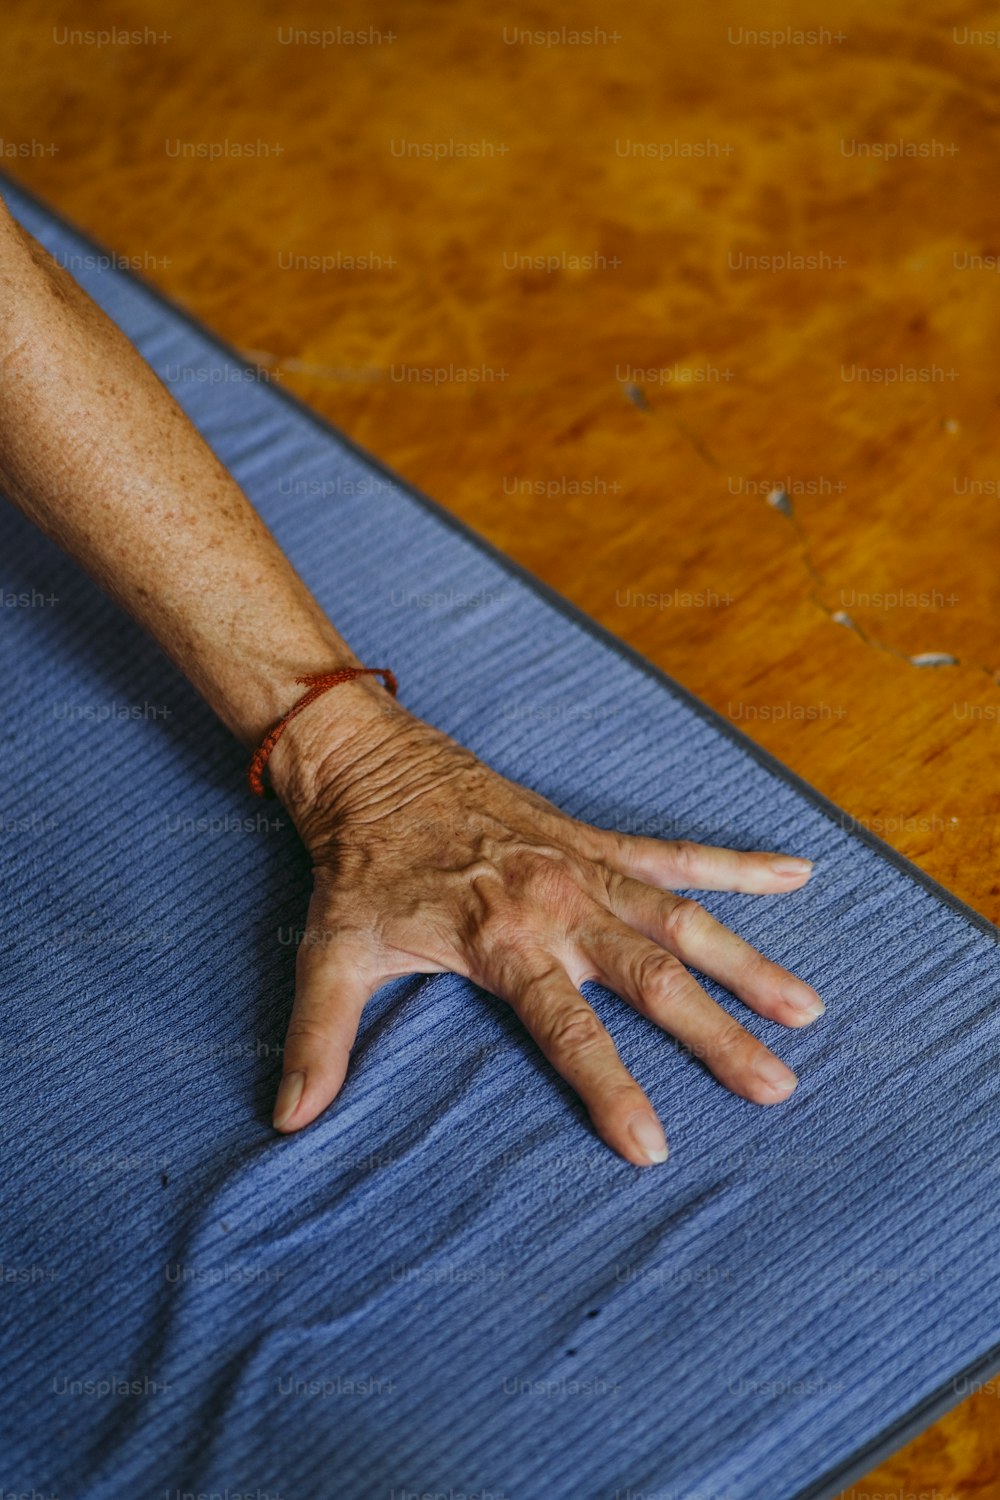 a person's hand resting on a blue mat